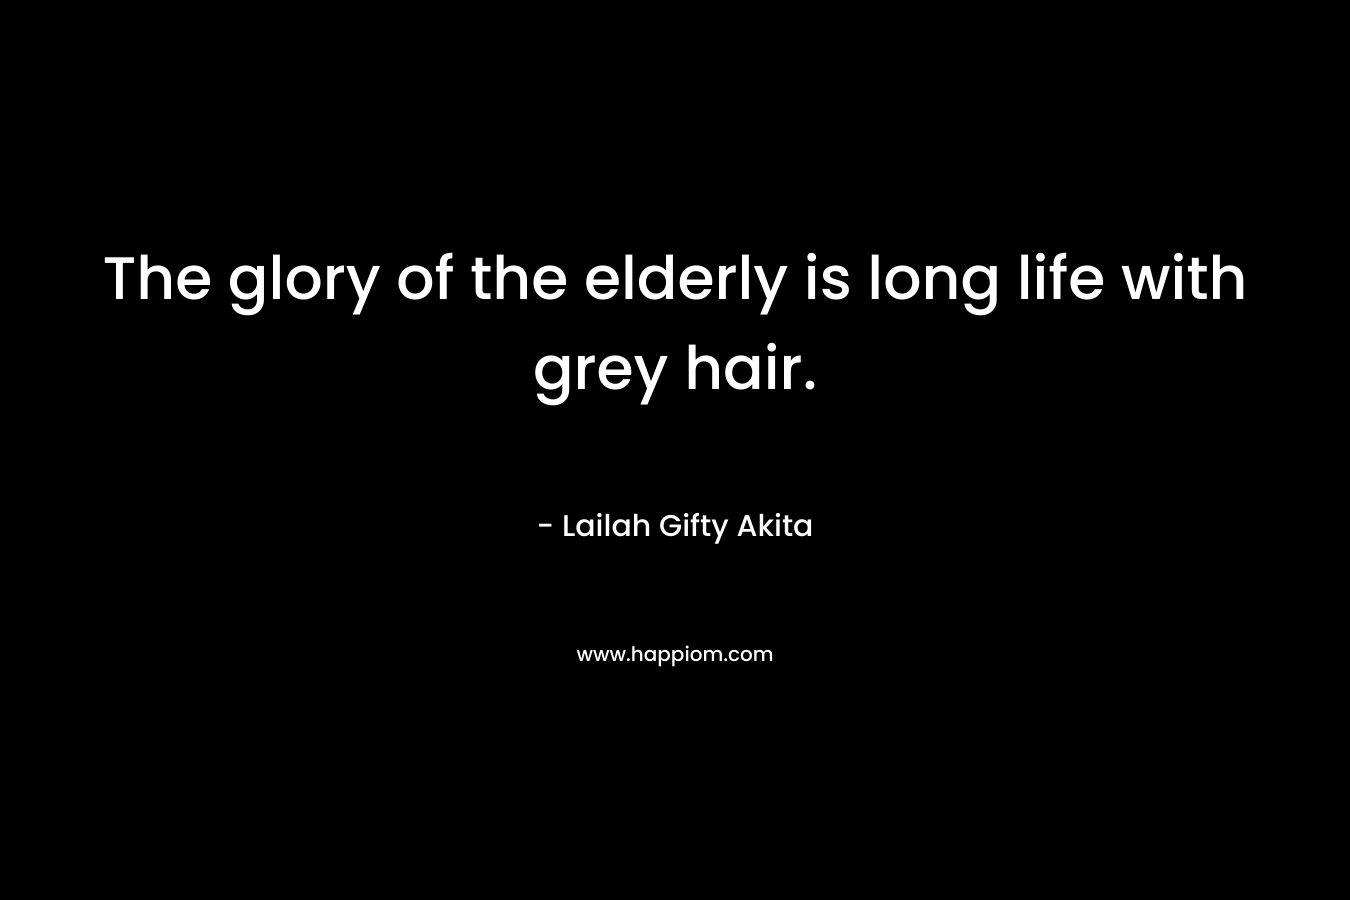 The glory of the elderly is long life with grey hair.